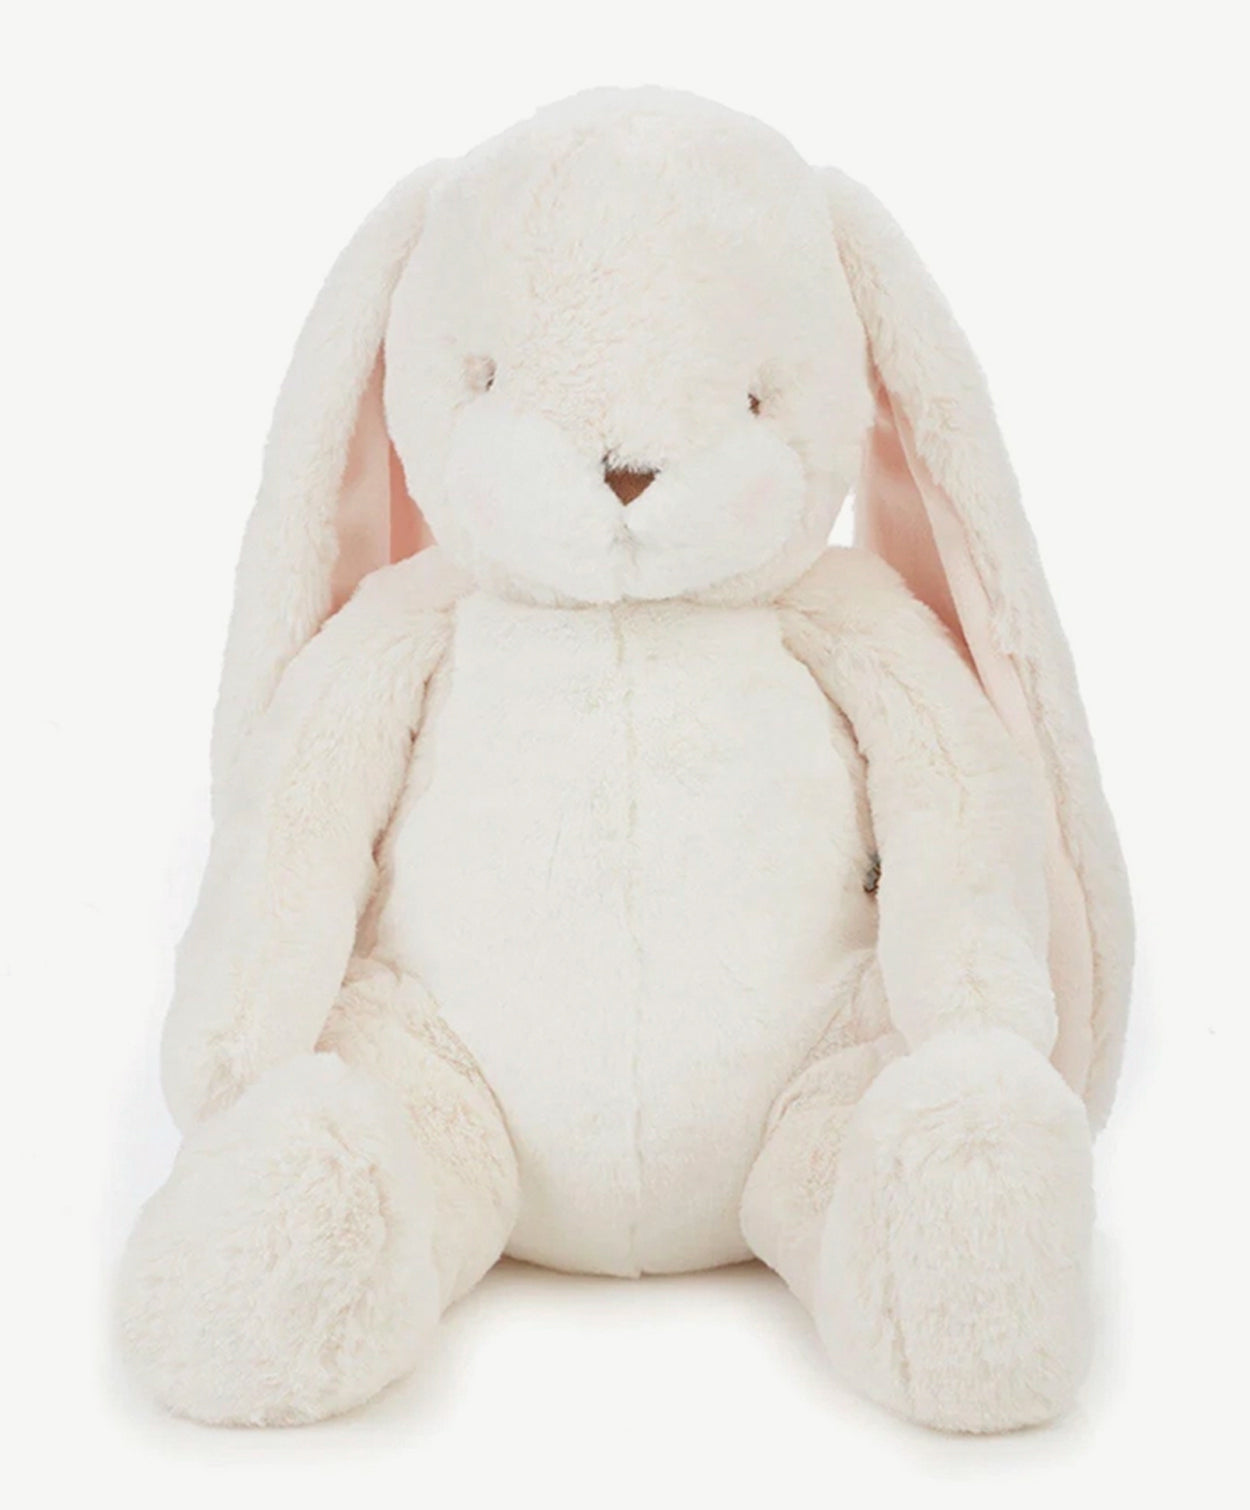 Big Nibble 20" - Otis the Magical Snuggle Bunny by Bunnies by the Bay